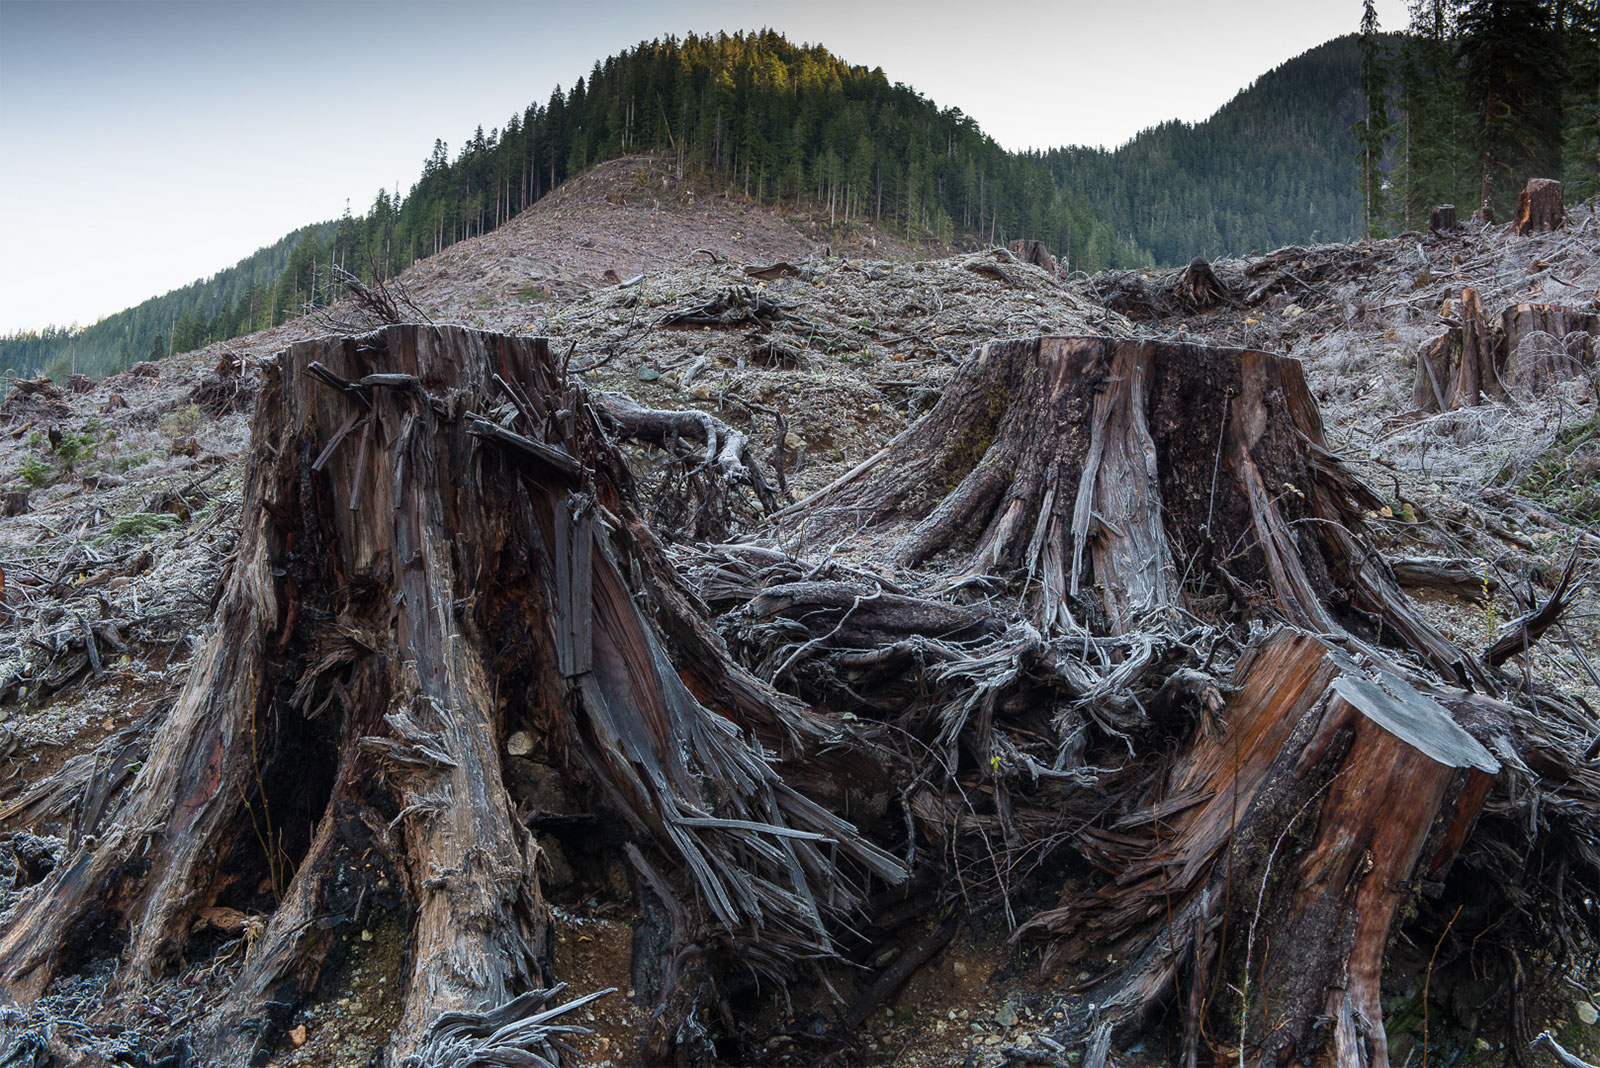 Three brown tree stumps in the middle of a barren clearcut.